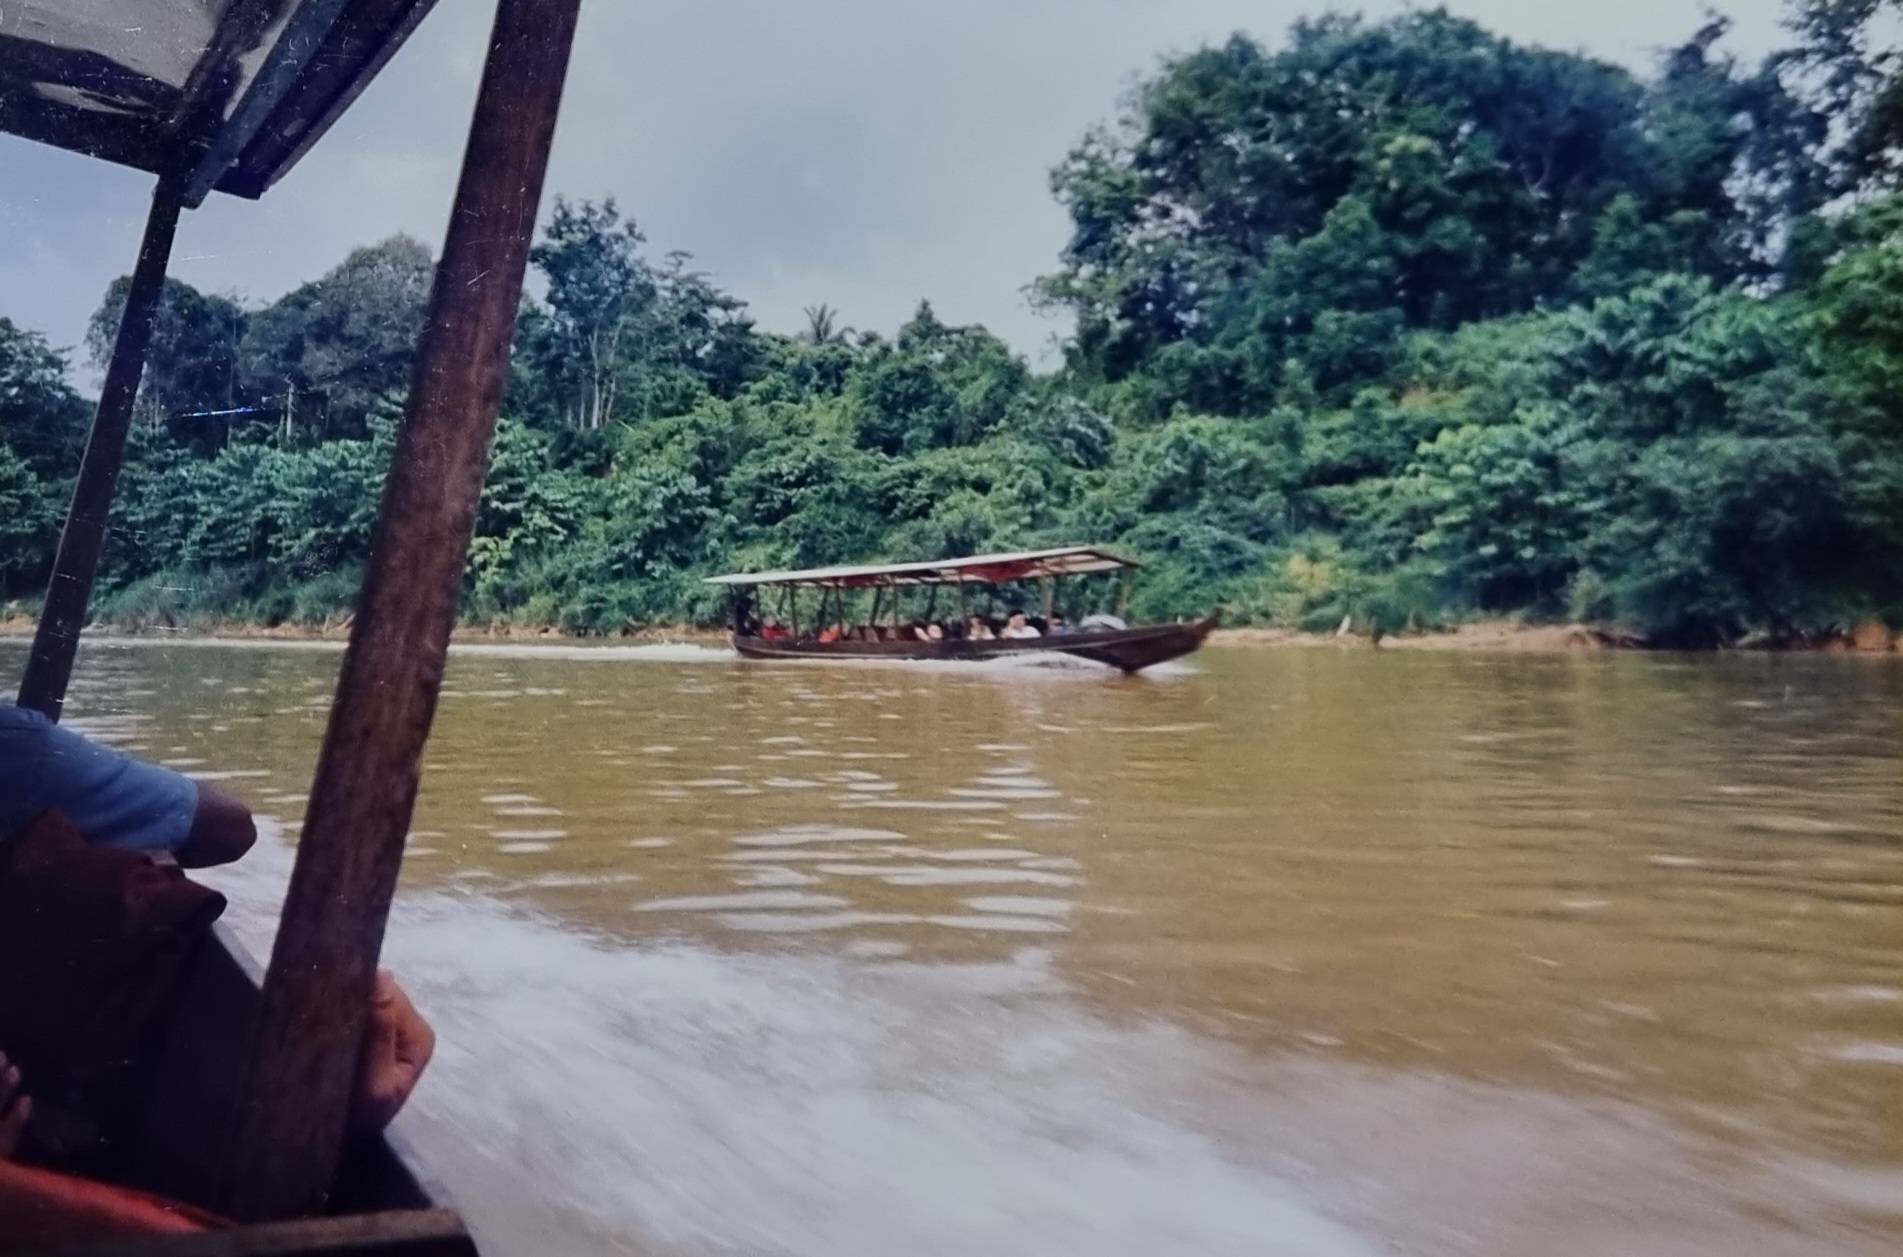 A three and a half hour boat ride up river to Taman Negara National Park felt like a real adventure.